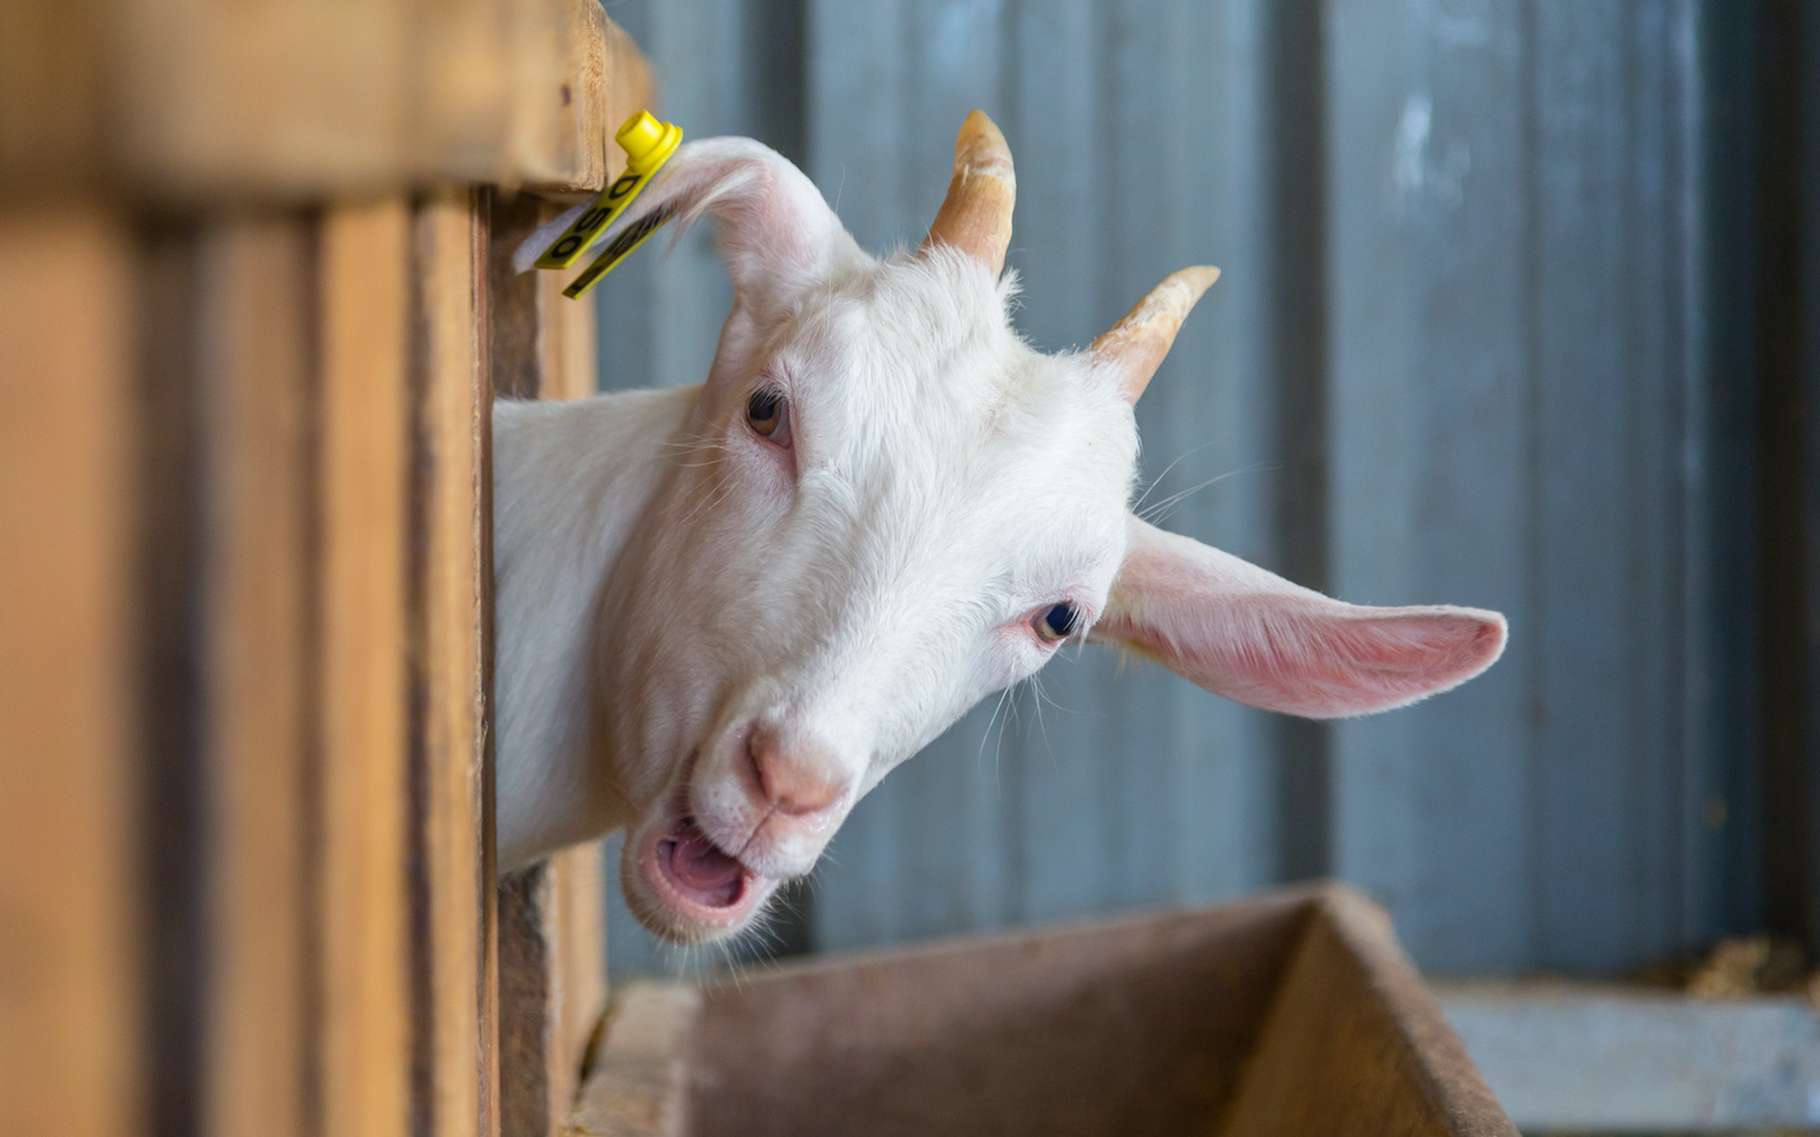 Are goats as smart as dogs?